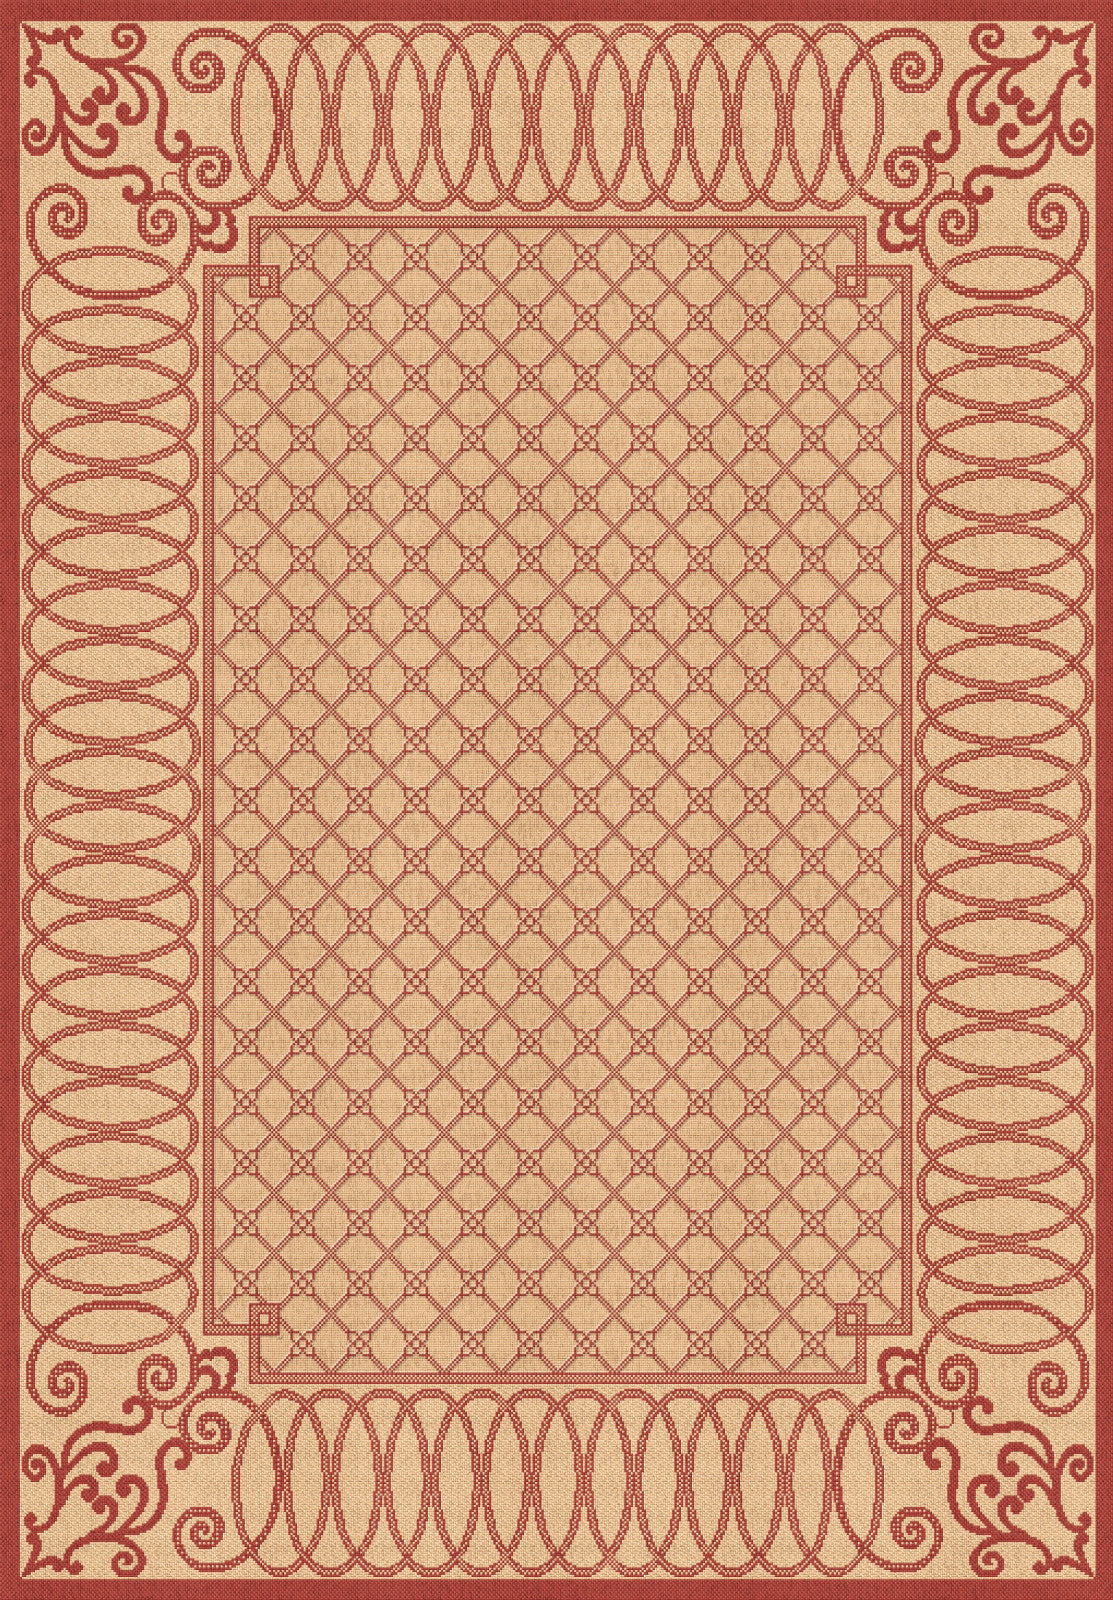 Dynamic Rugs Piazza 2587 Beige/Red Area Rug main image